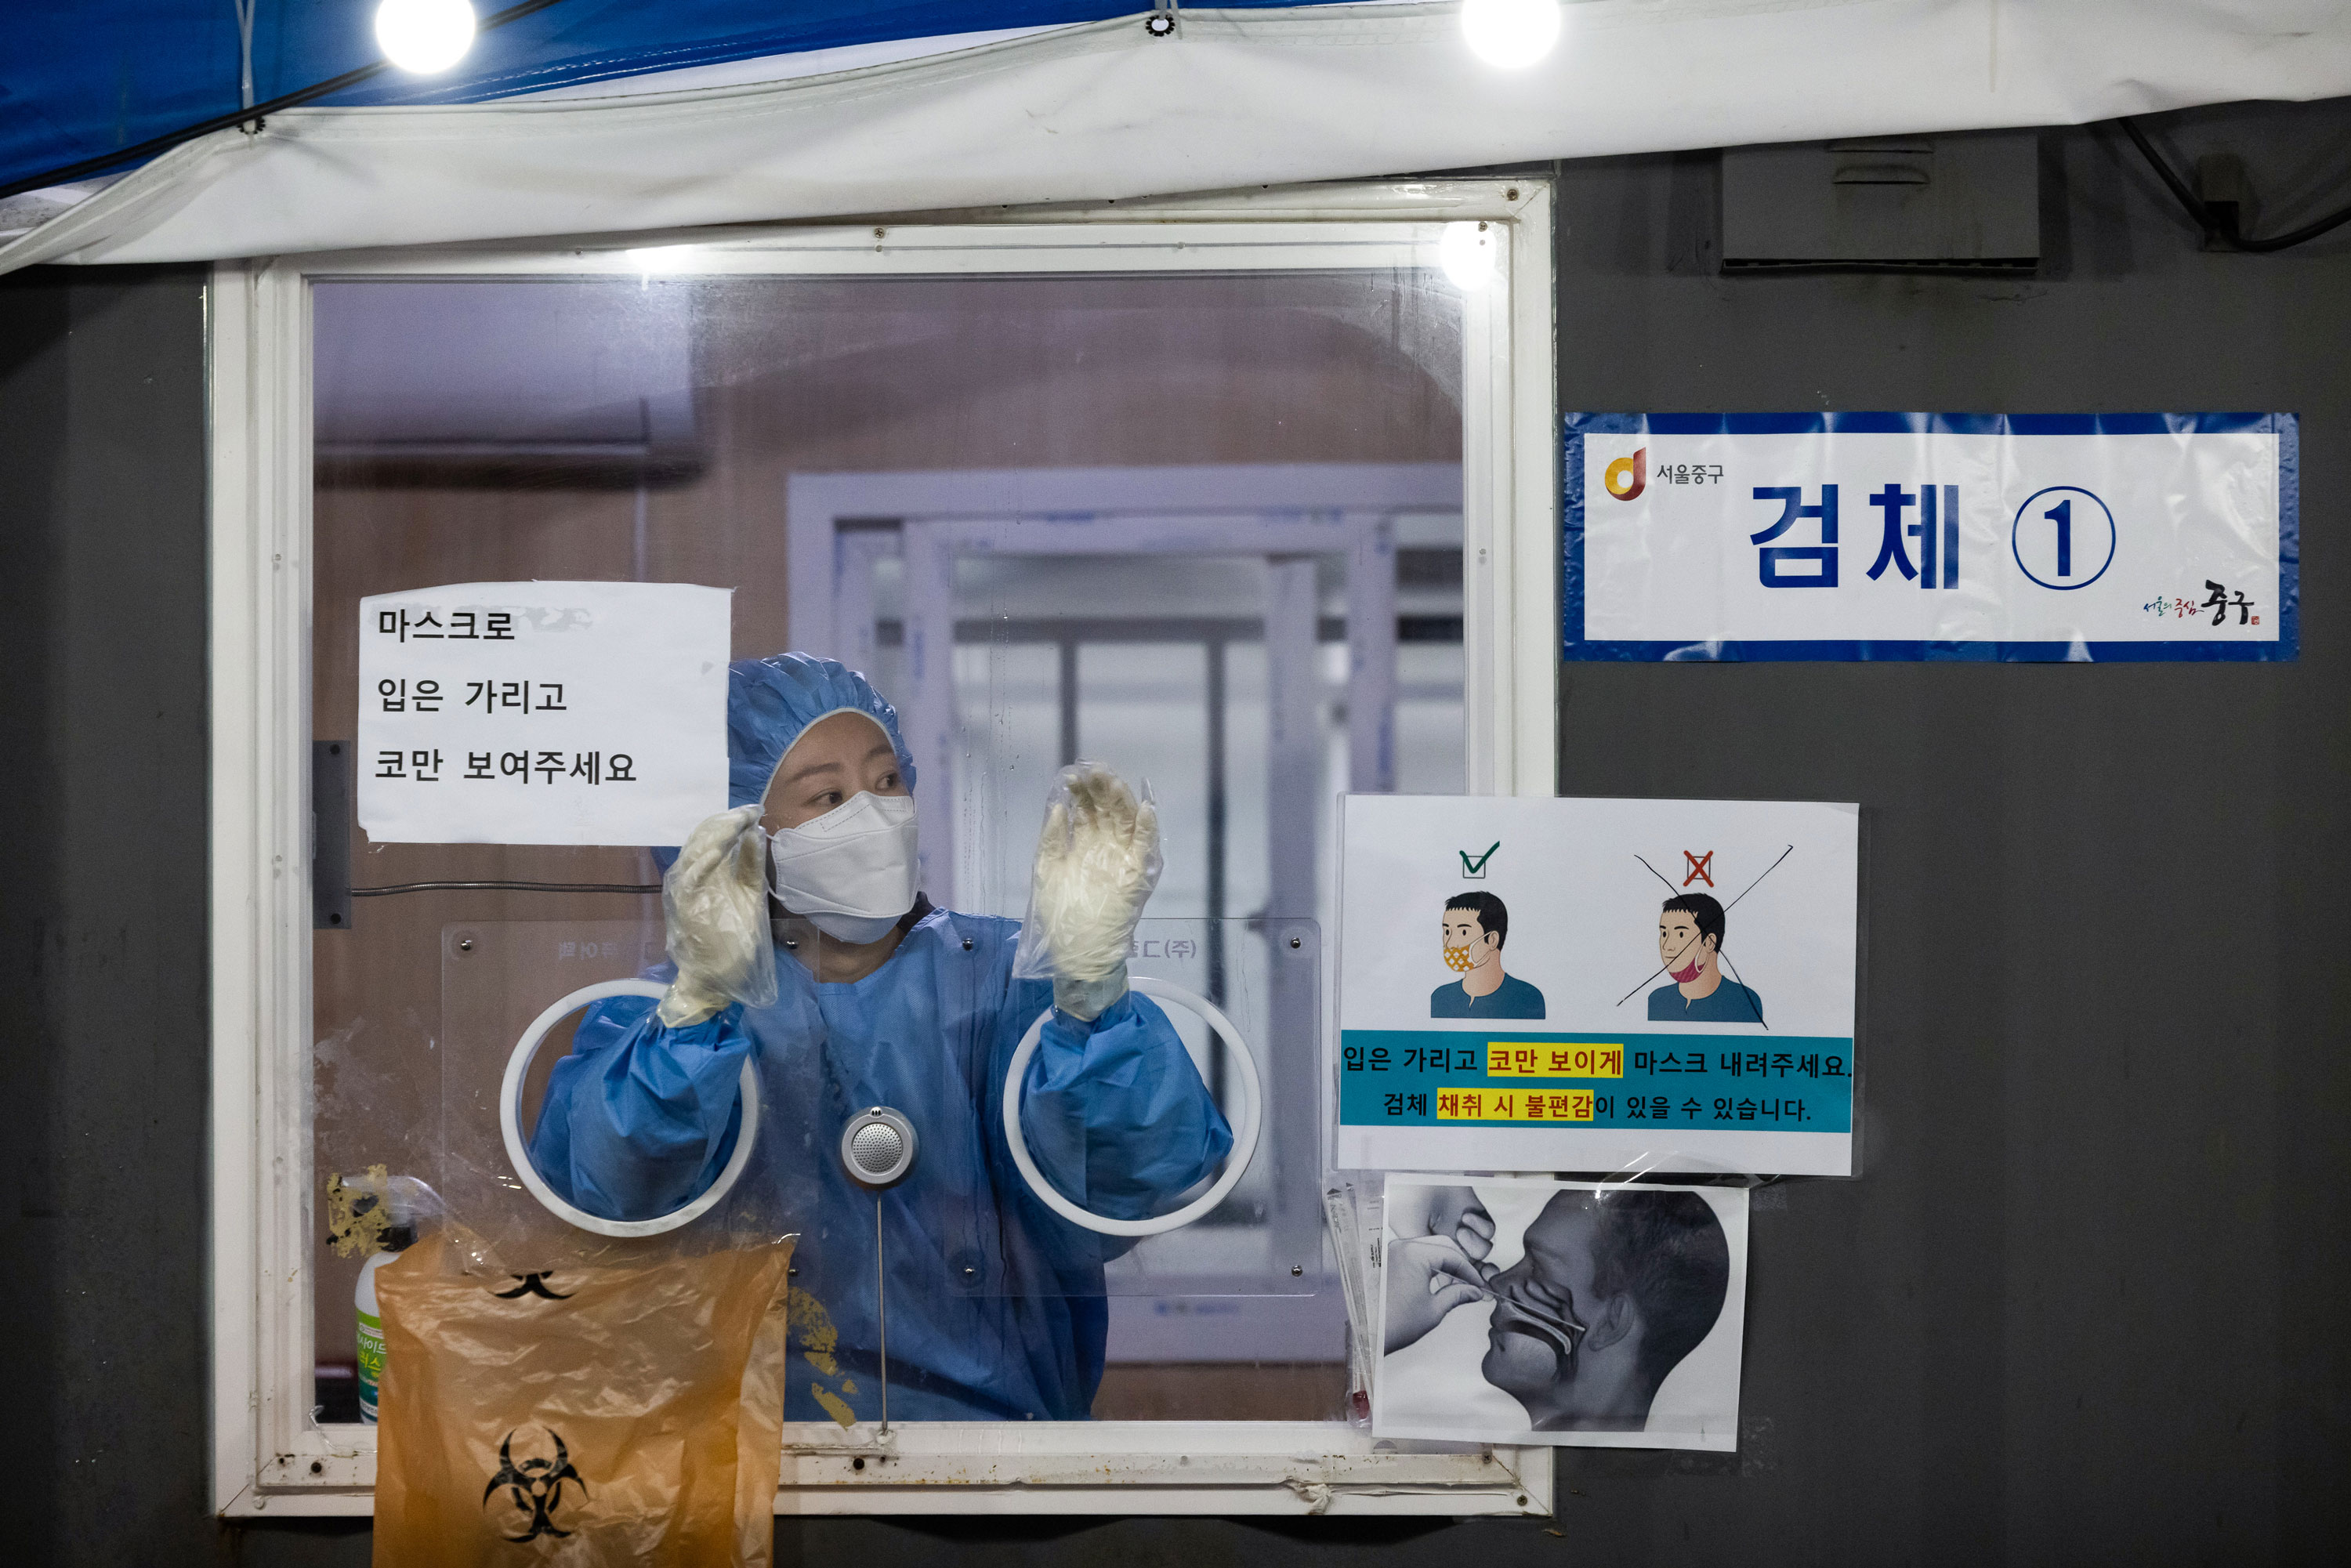 A medical worker prepares to perform a Covid-19 test at a temporary testing site outside Seoul Station in Seoul, South Korea, on Tuesday, November 30, 2021.